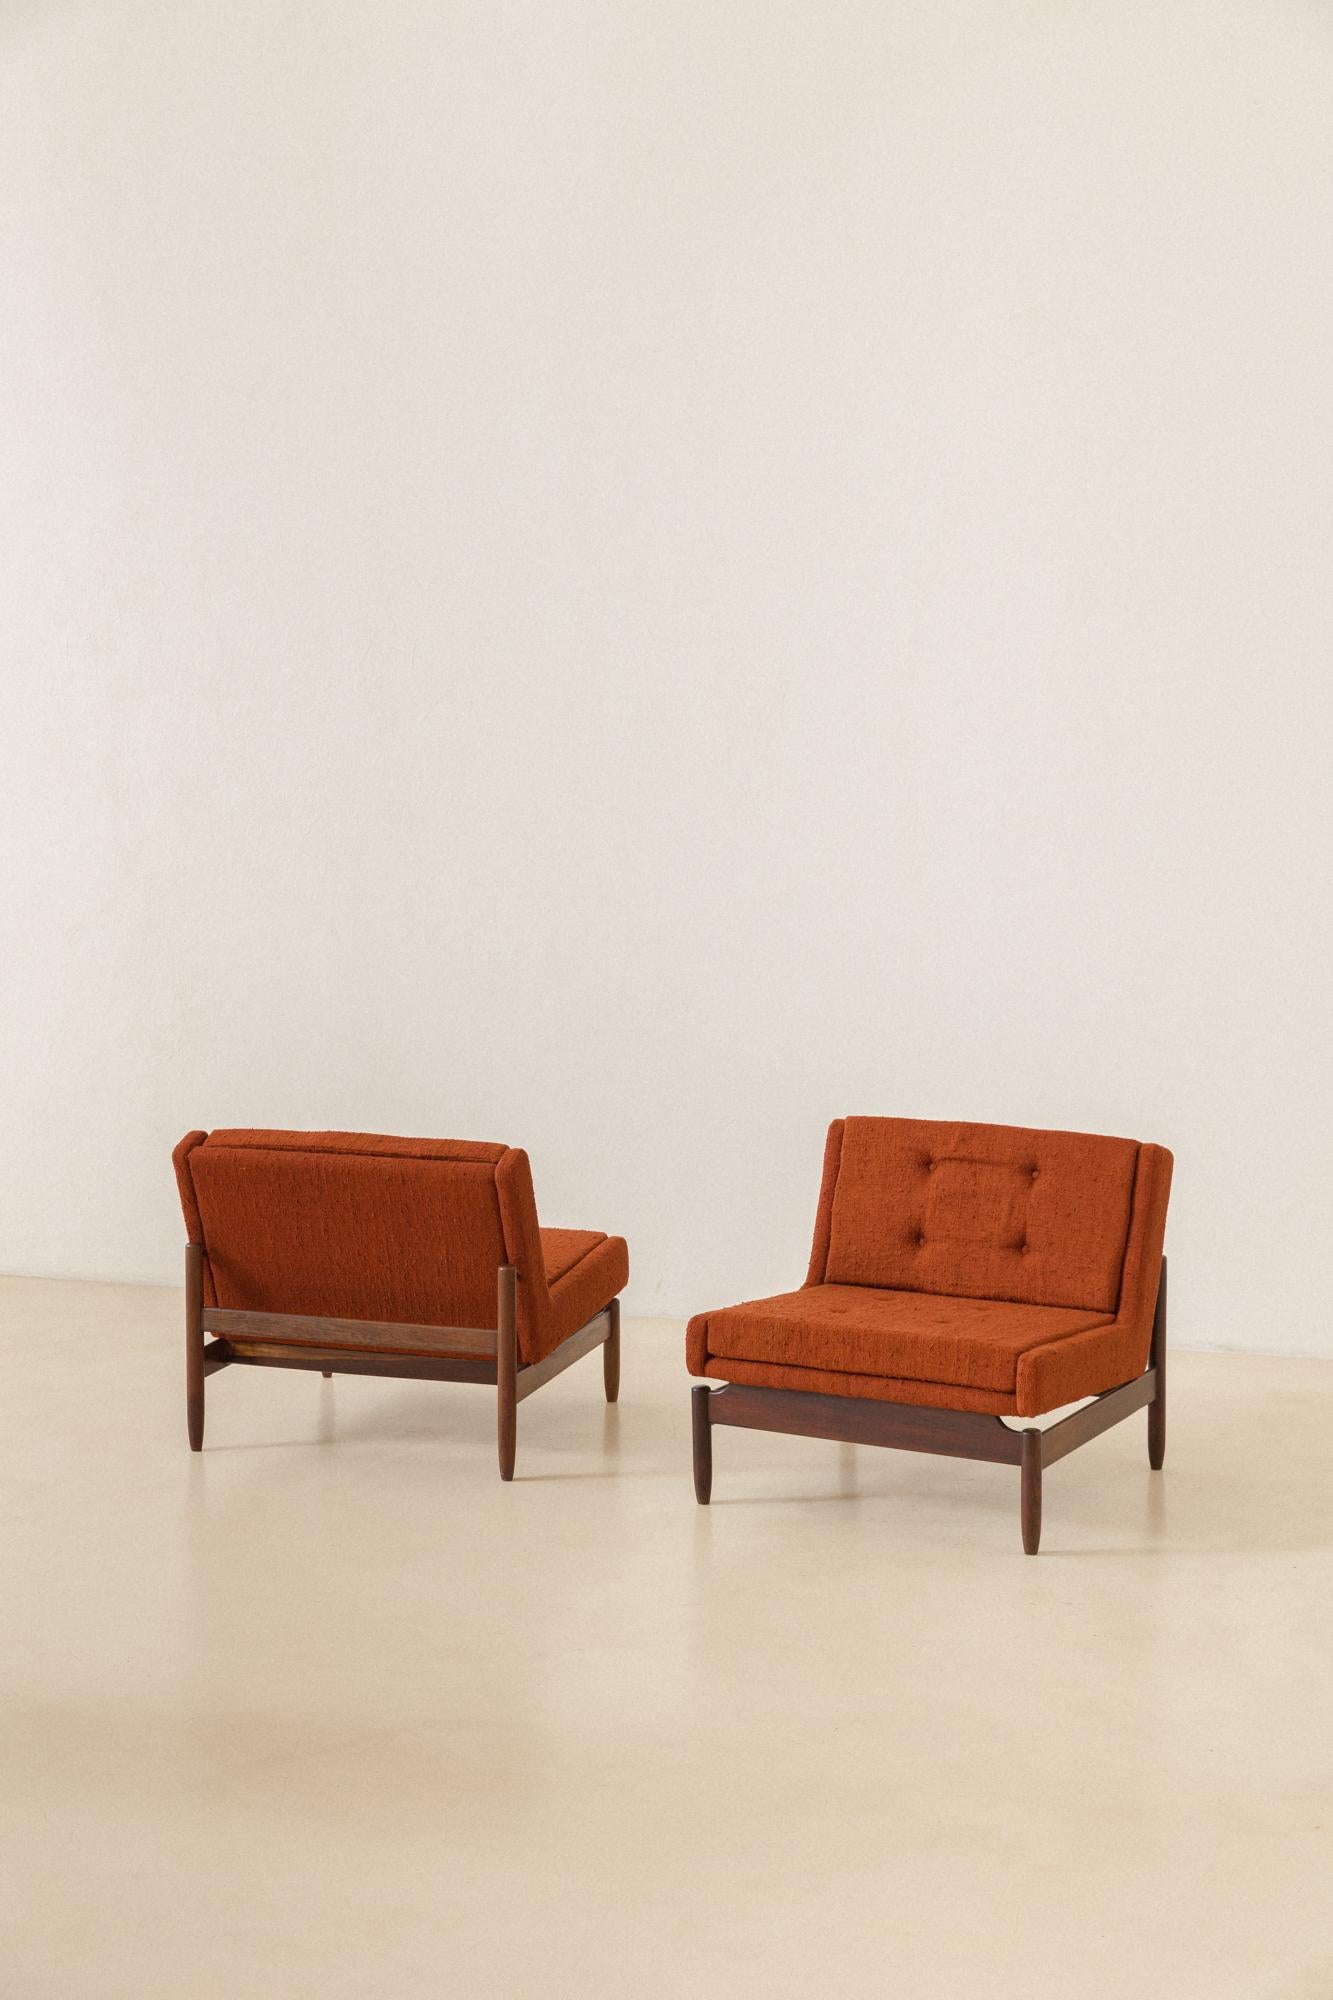 Rosewood Armchairs by Móveis Cantù, 1960s, Brazilian Midcentury In Good Condition For Sale In New York, NY